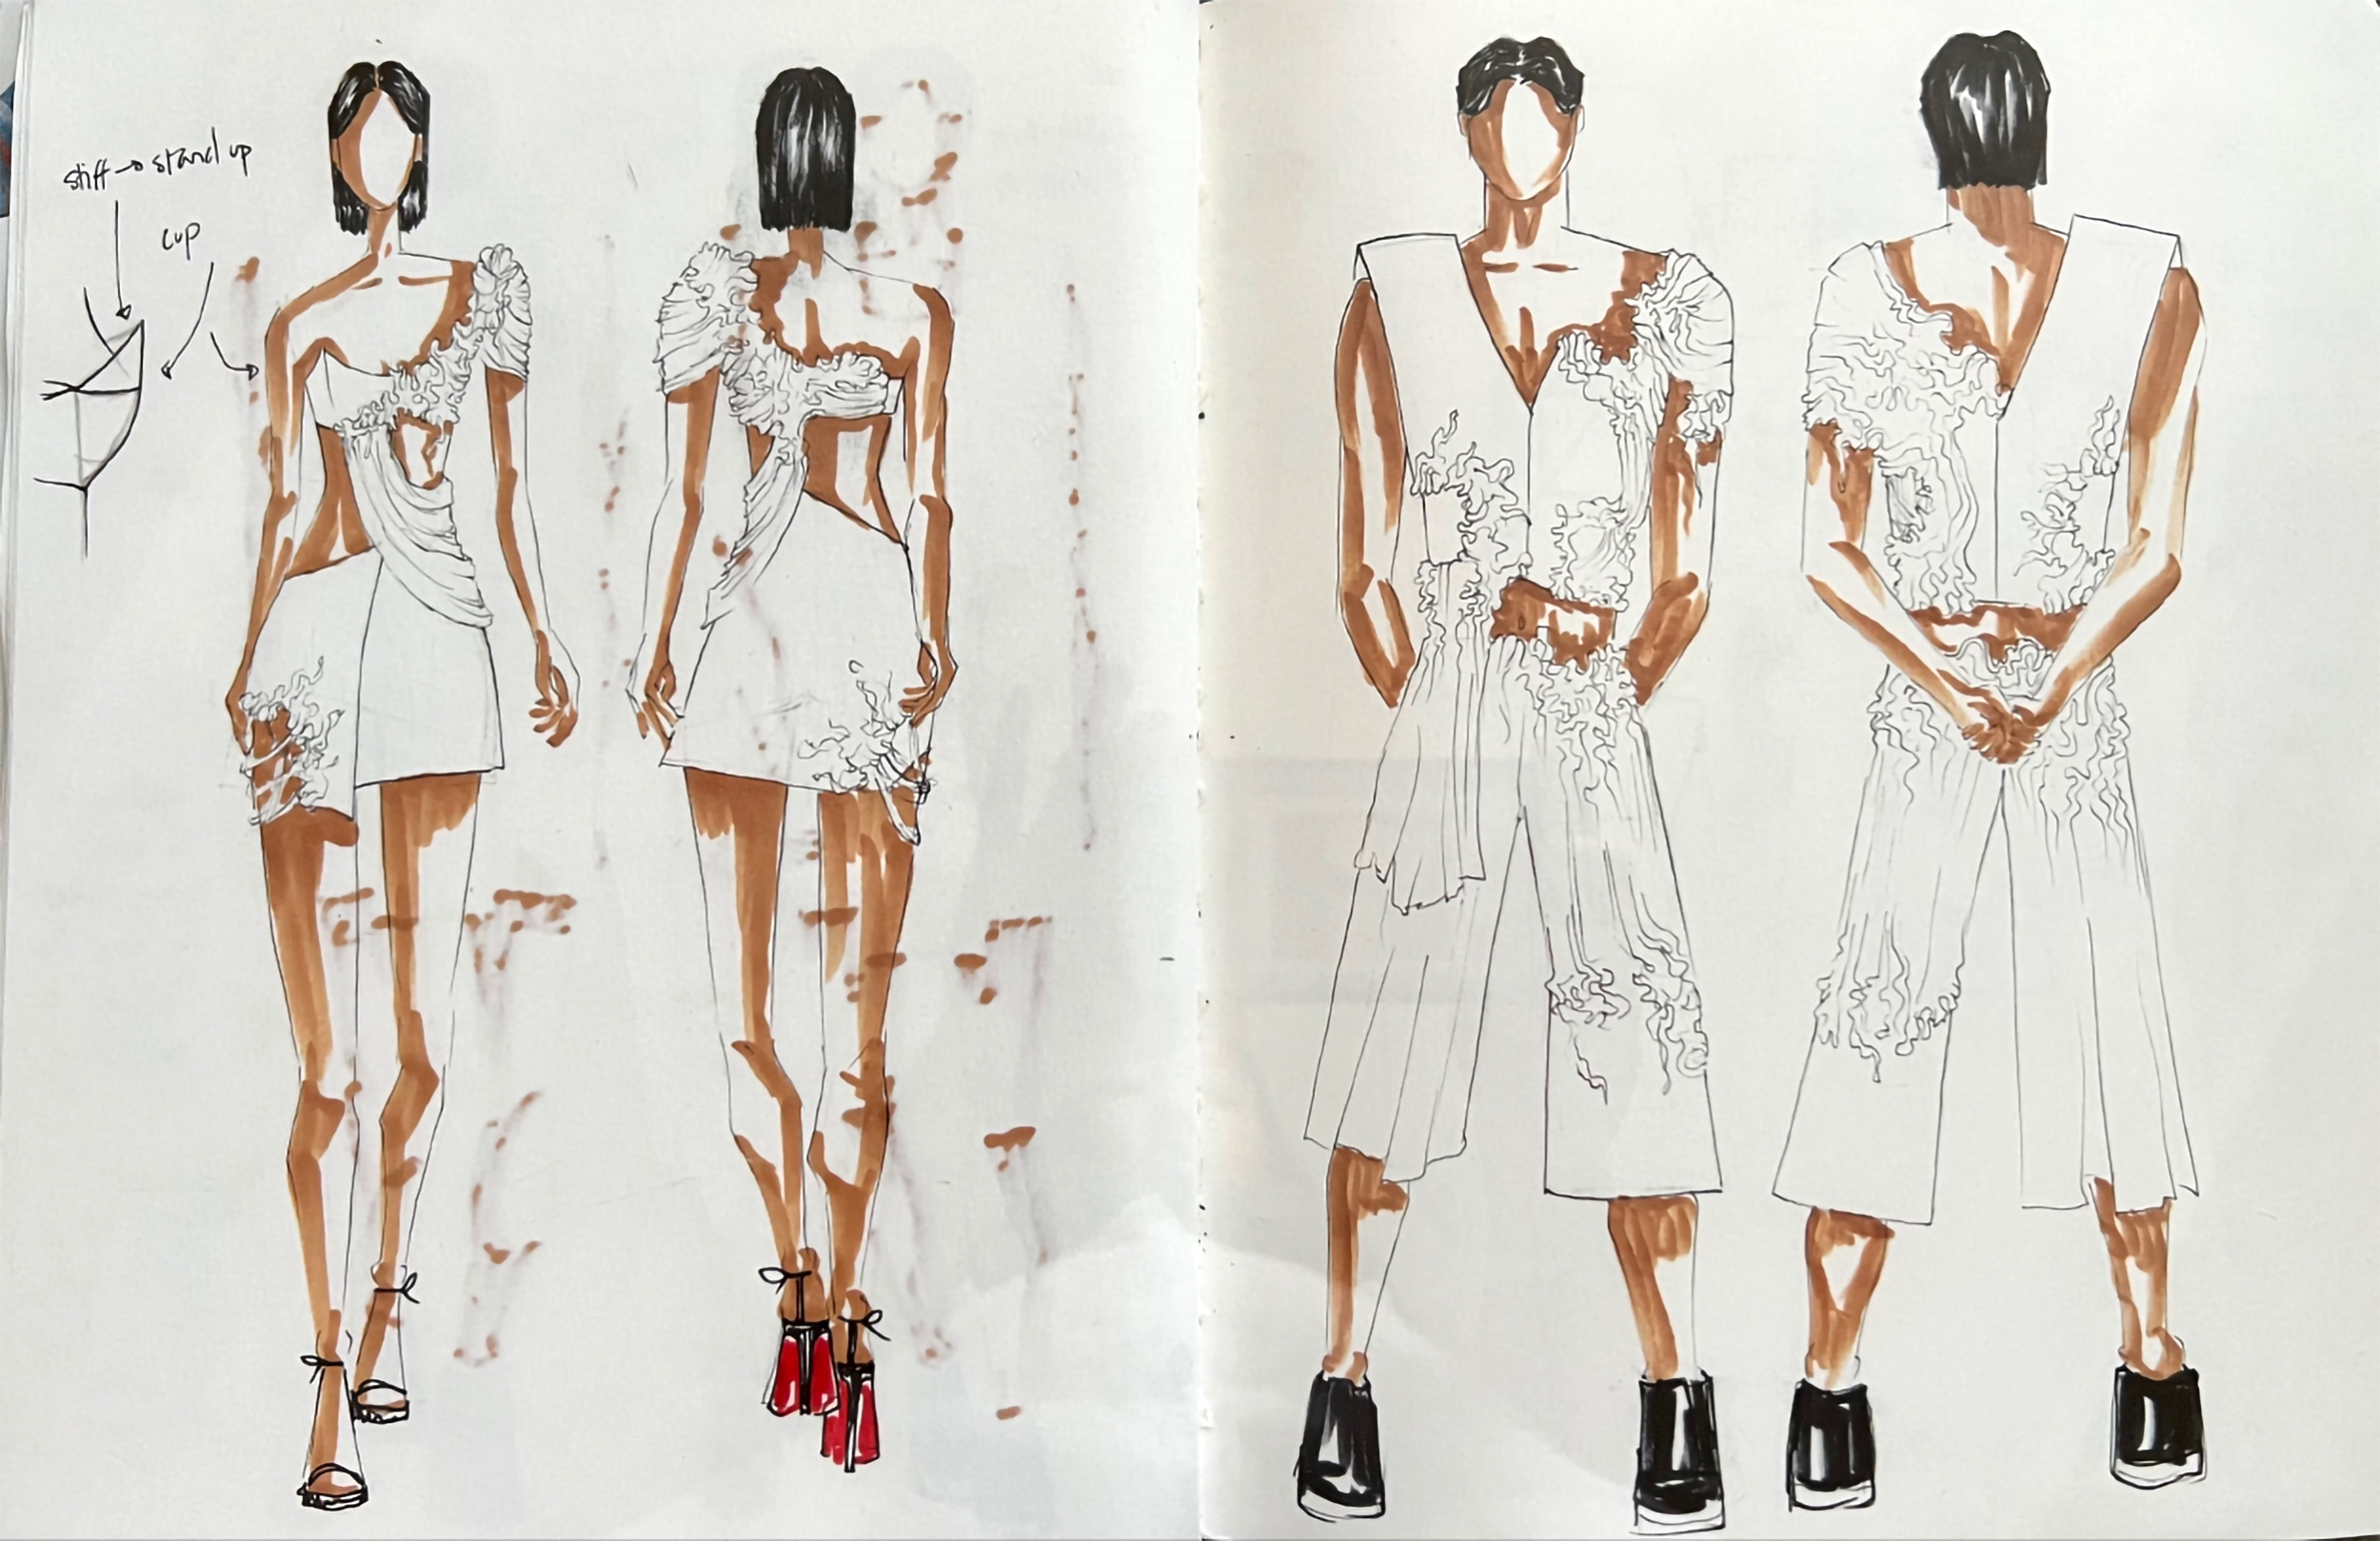 Pages from Cayman Chen's sketchbook.